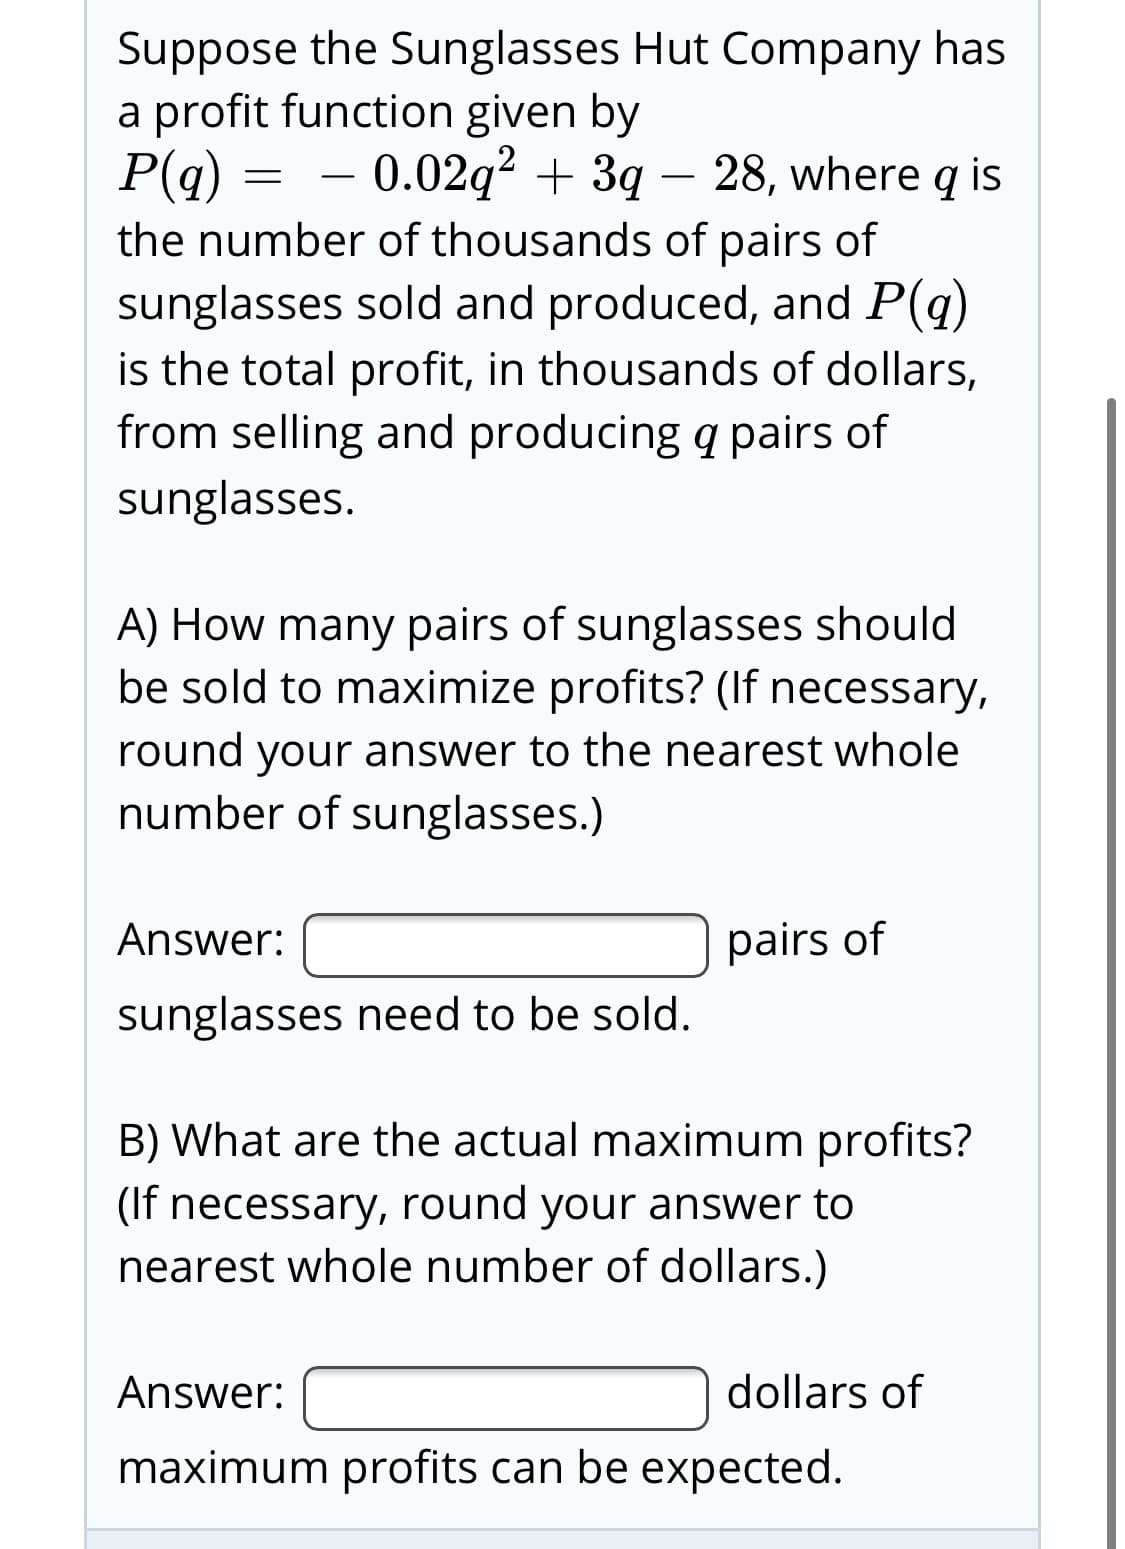 Suppose the Sunglasses Hut Company has
a profit function given by
P(q)
the number of thousands of pairs of
sunglasses sold and produced, and P(q)
is the total profit, in thousands of dollars,
from selling and producing q pairs of
= - 0.02q? + 3q – 28, where q is
sunglasses.
A) How many pairs of sunglasses should
be sold to maximize profits? (If necessary,
round your answer to the nearest whole
number of sunglasses.)
Answer:
pairs of
sunglasses need to be sold.
B) What are the actual maximum profits?
(If necessary, round your answer to
nearest whole number of dollars.)
Answer:
dollars of
maximum profits can be expected.
